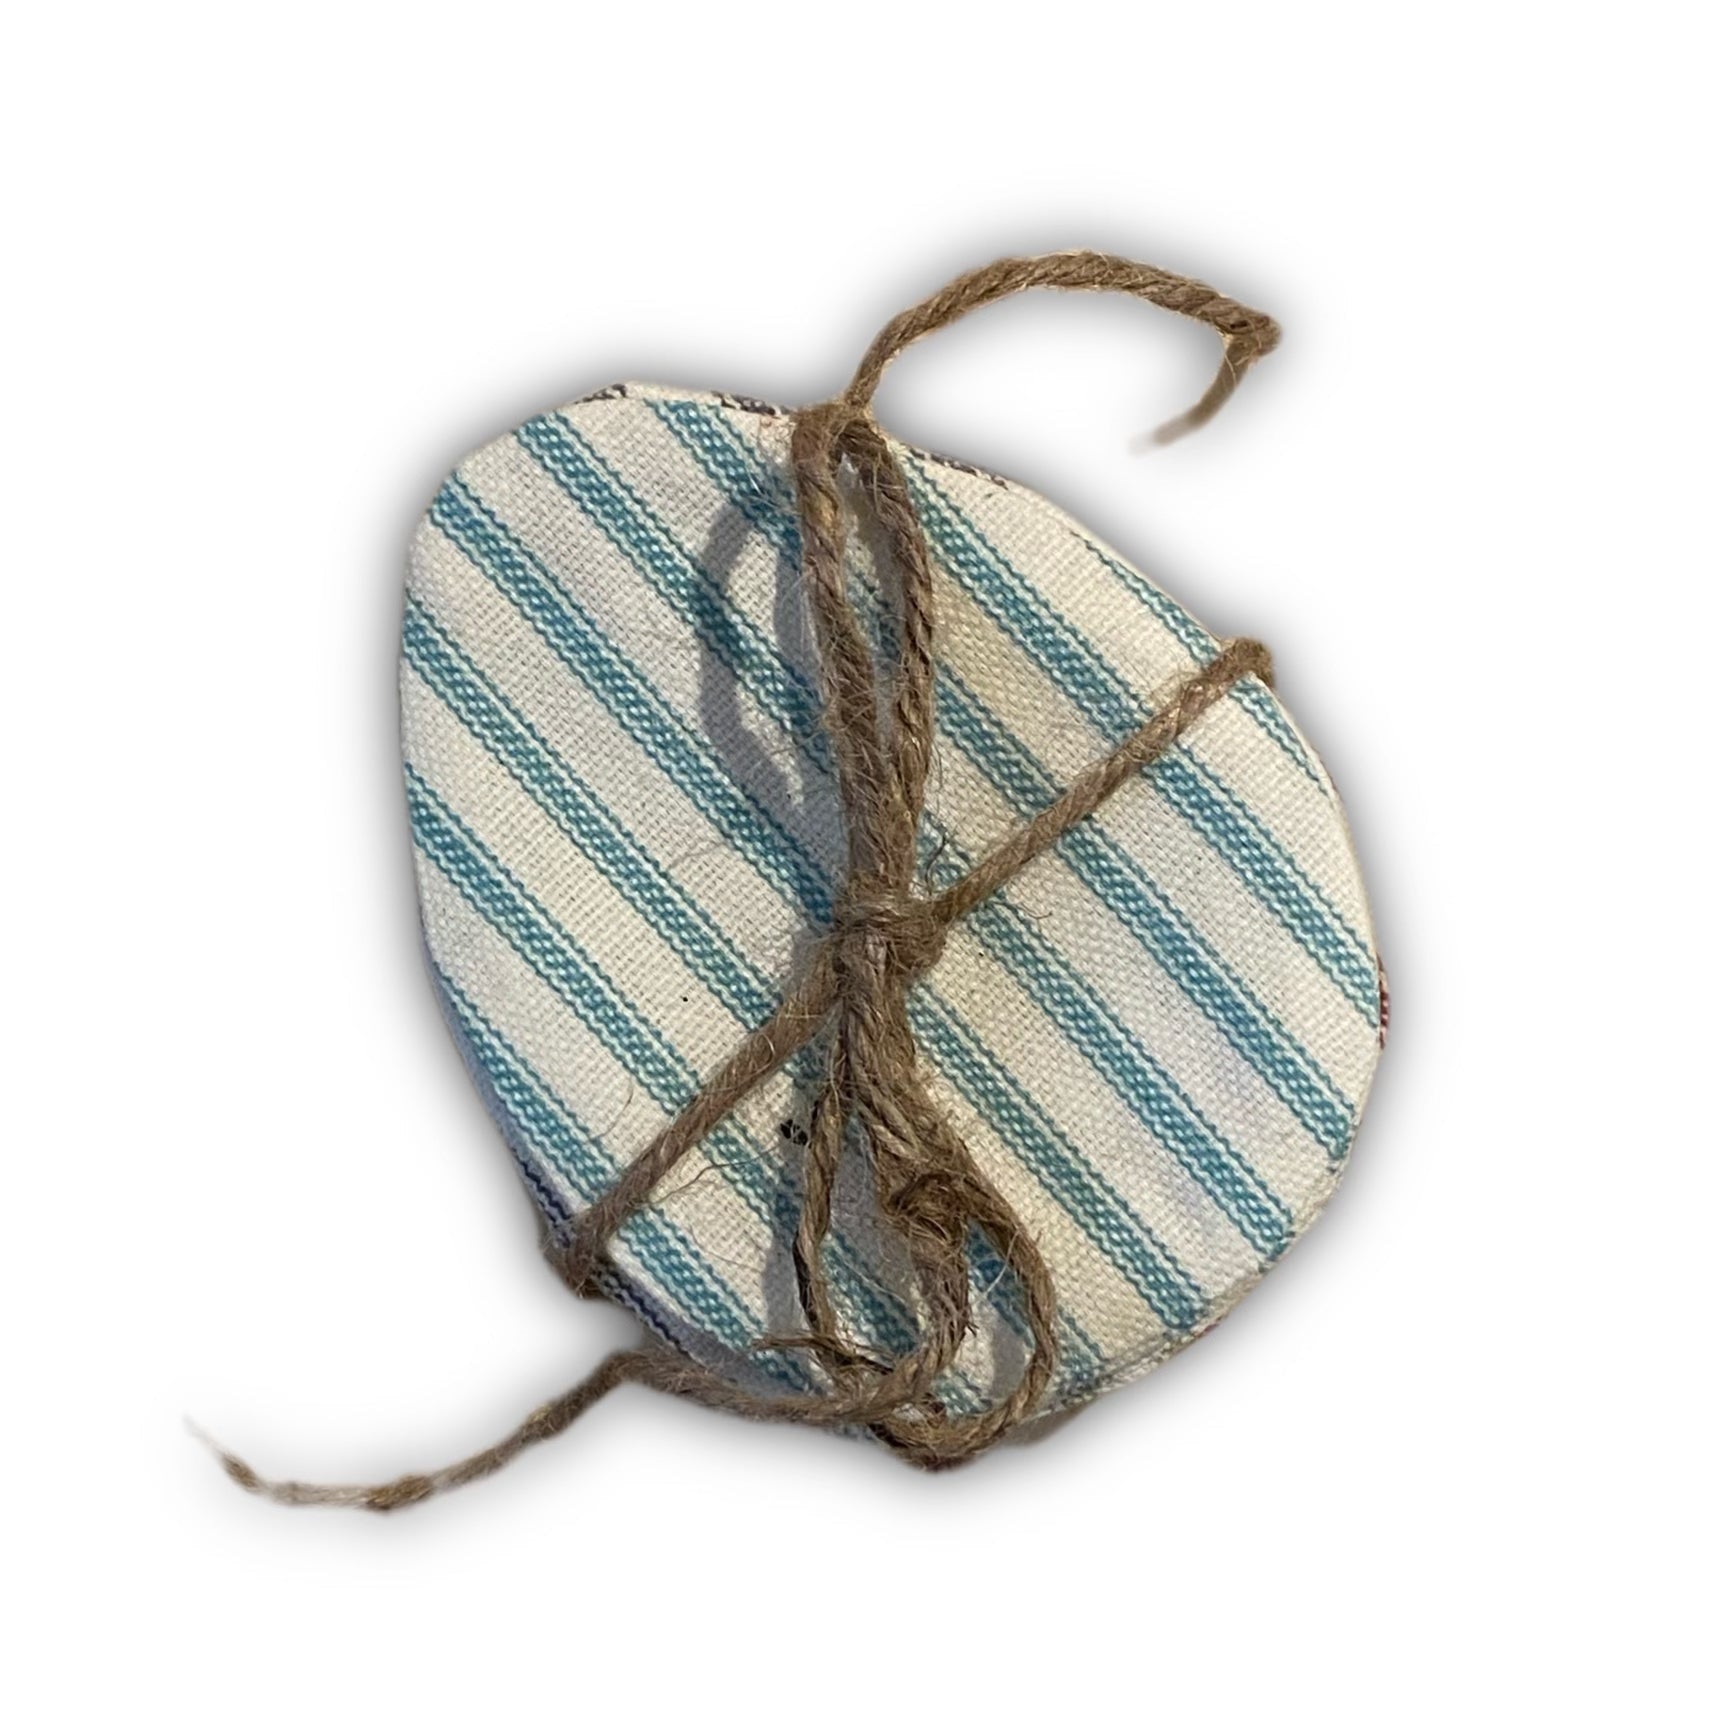 A bundle of striped fabric easter eggs tied together with twine, on white background.